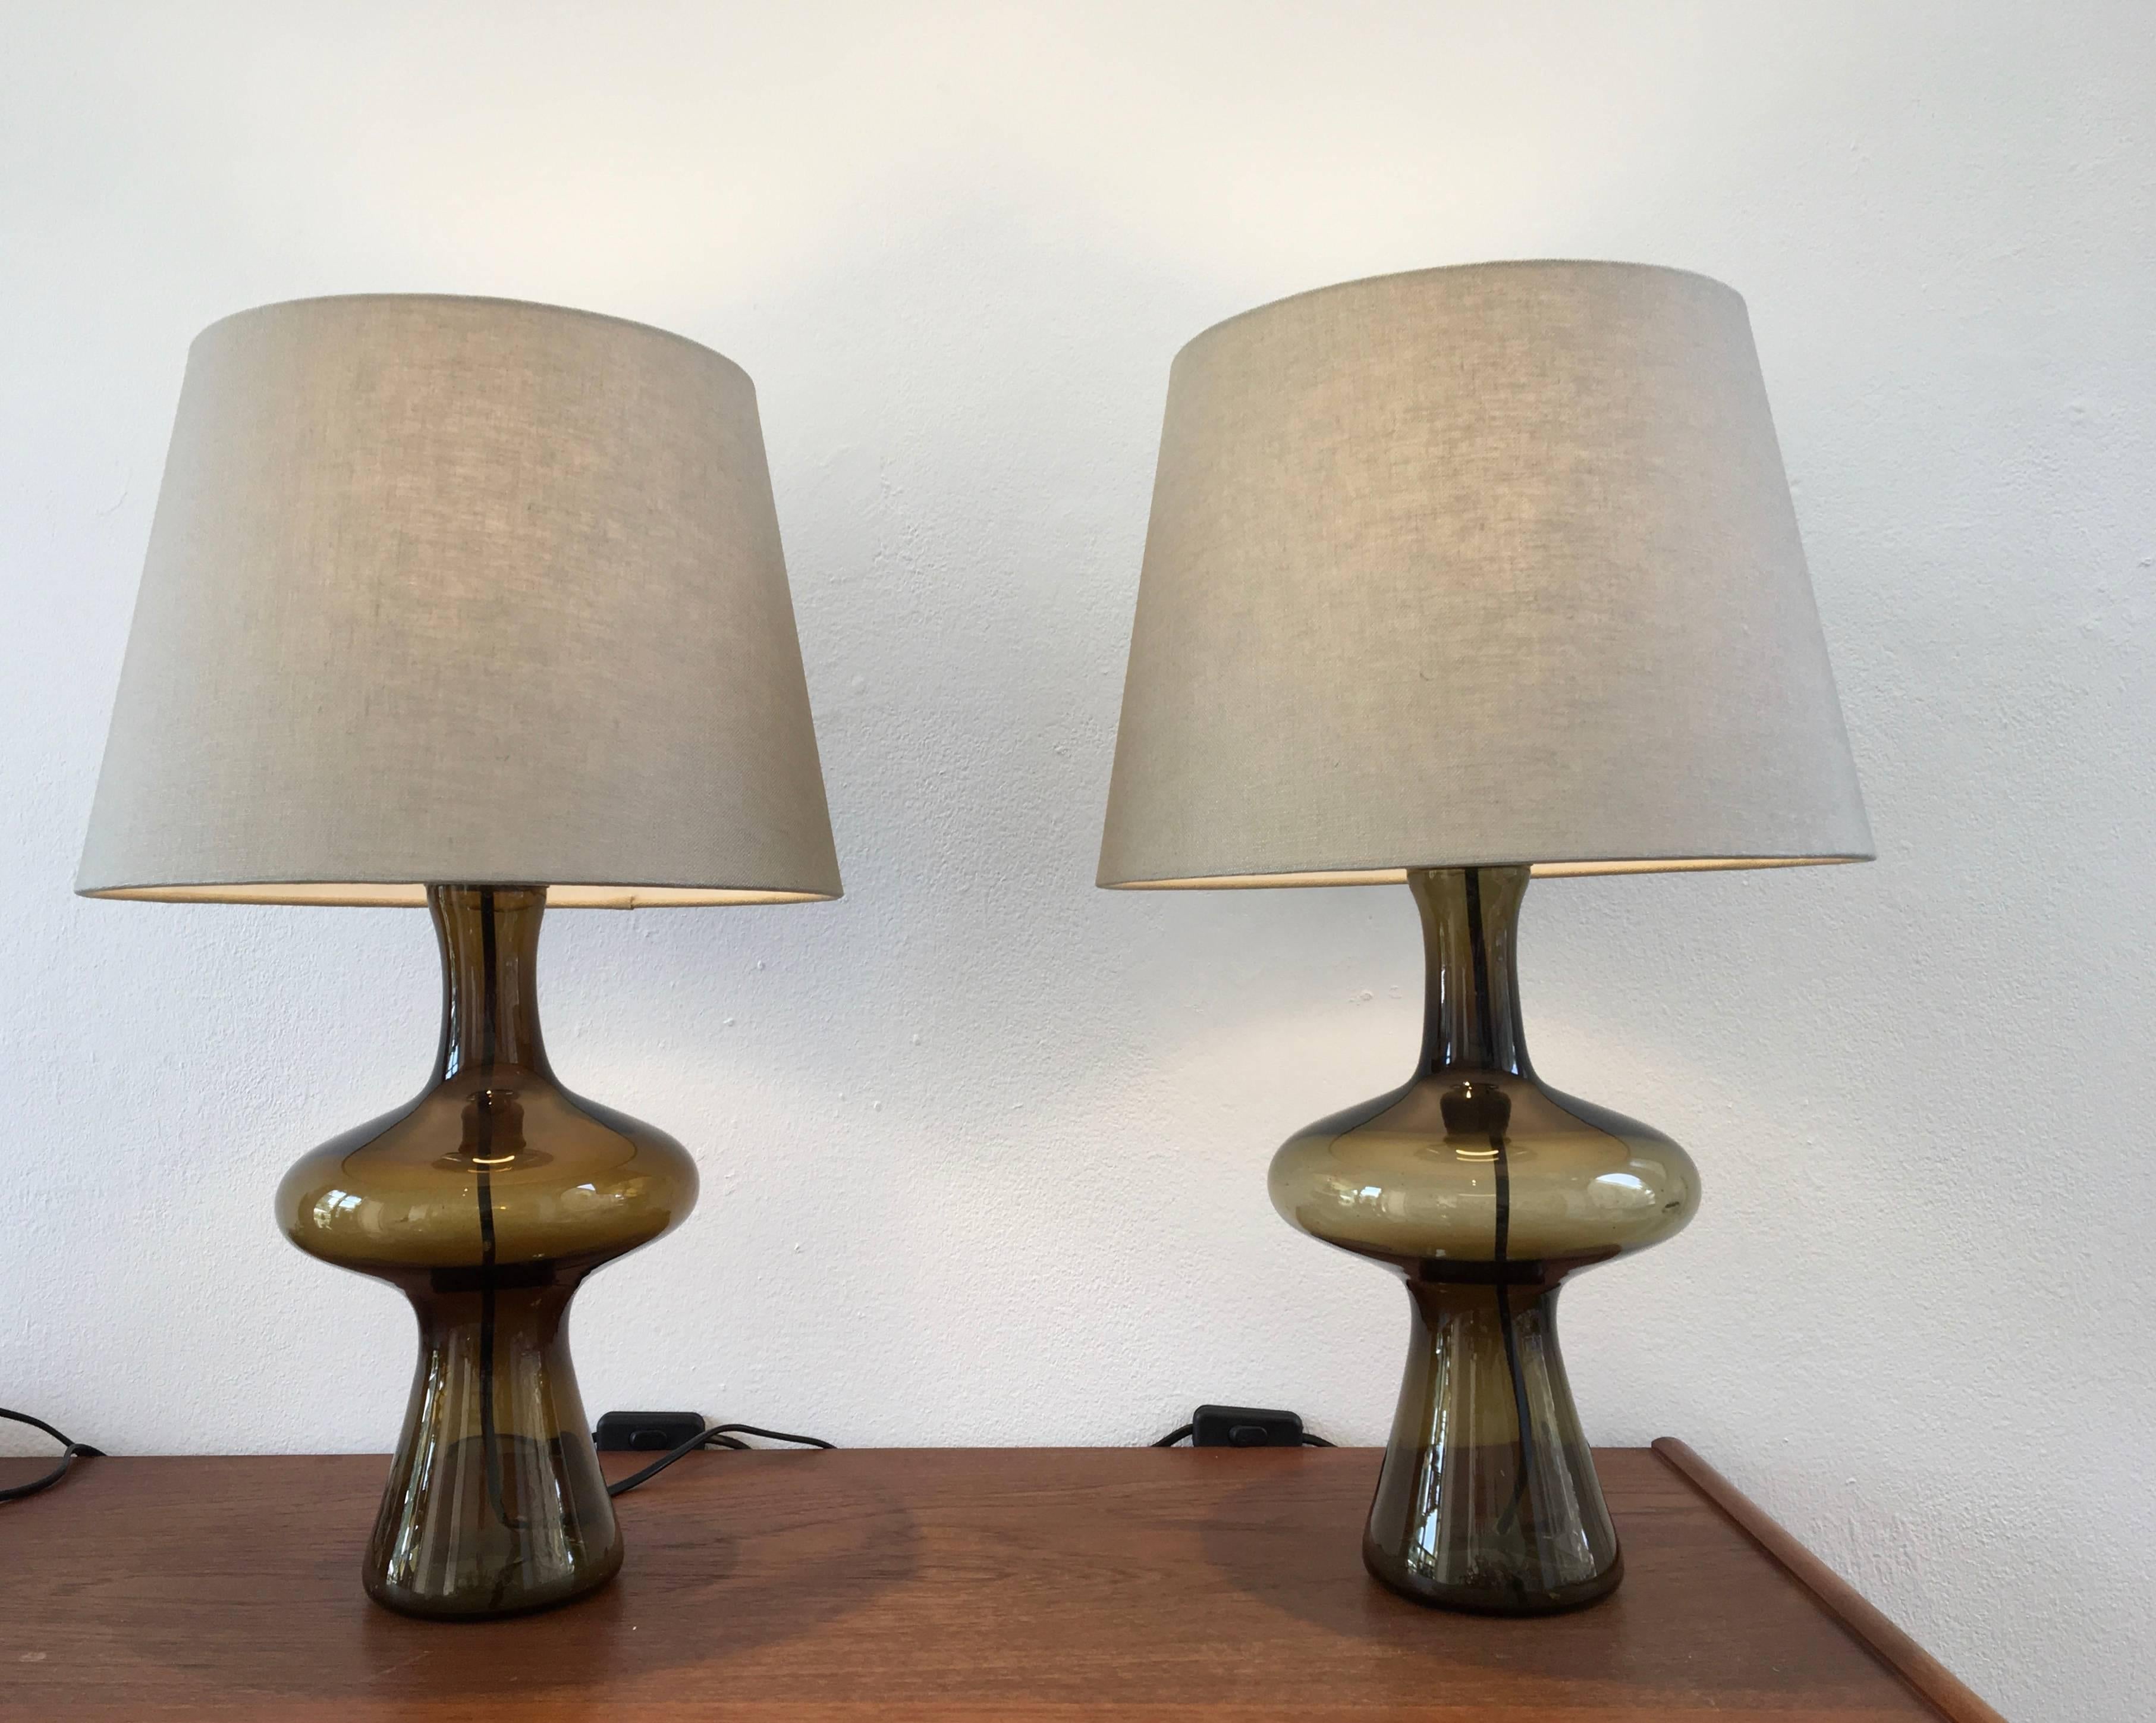 This pair of glass table lamps was produced by Danish company Holmegaard in the 1960s. The lamps have been rewired and have a new socket and lamp shades.